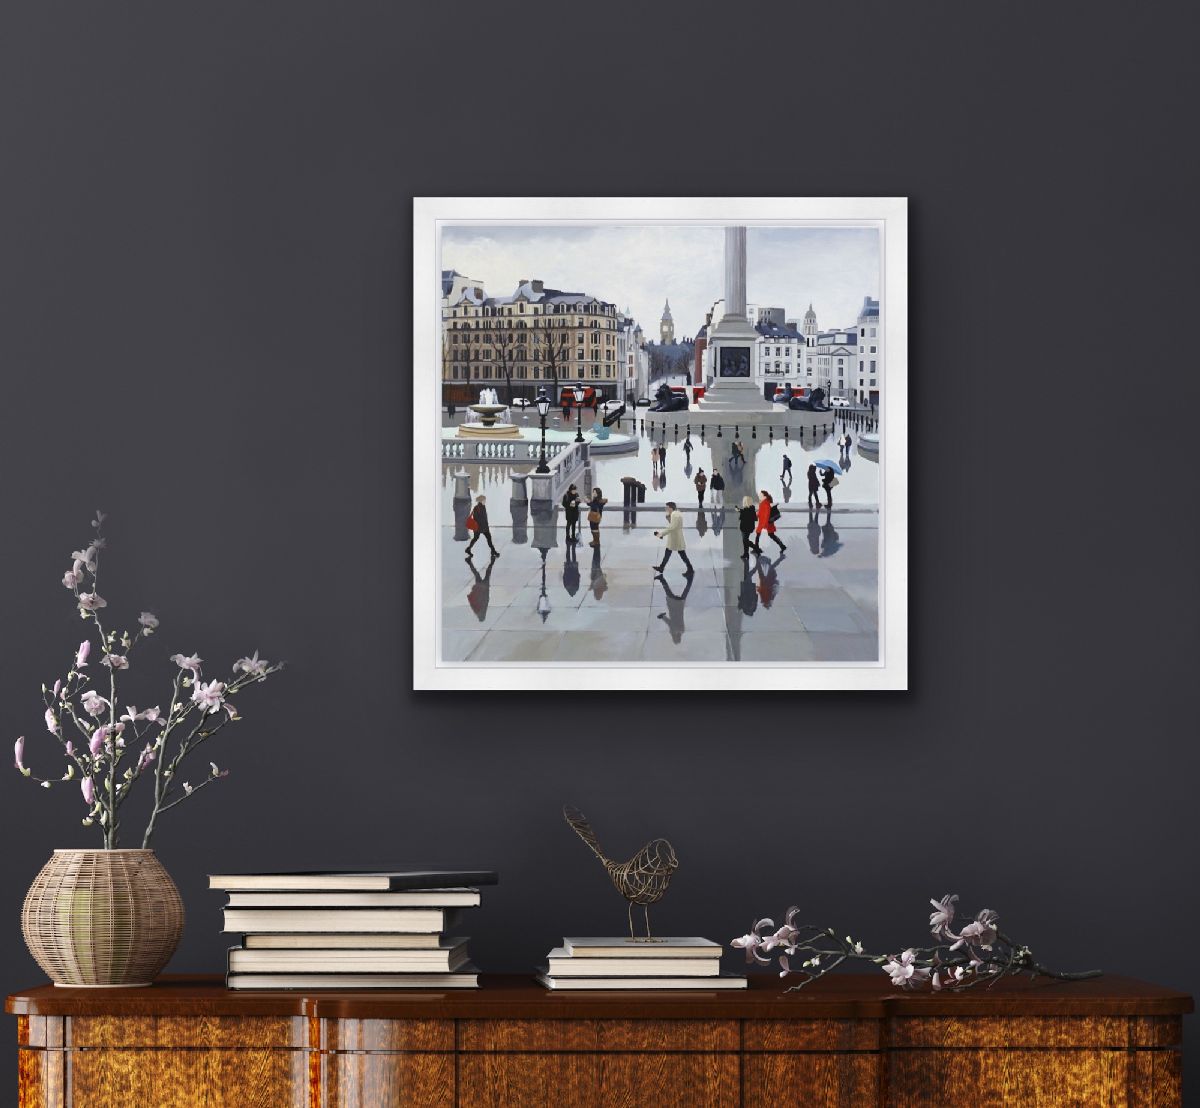 After the Rain, Trafalgar Square by Jo Quigley